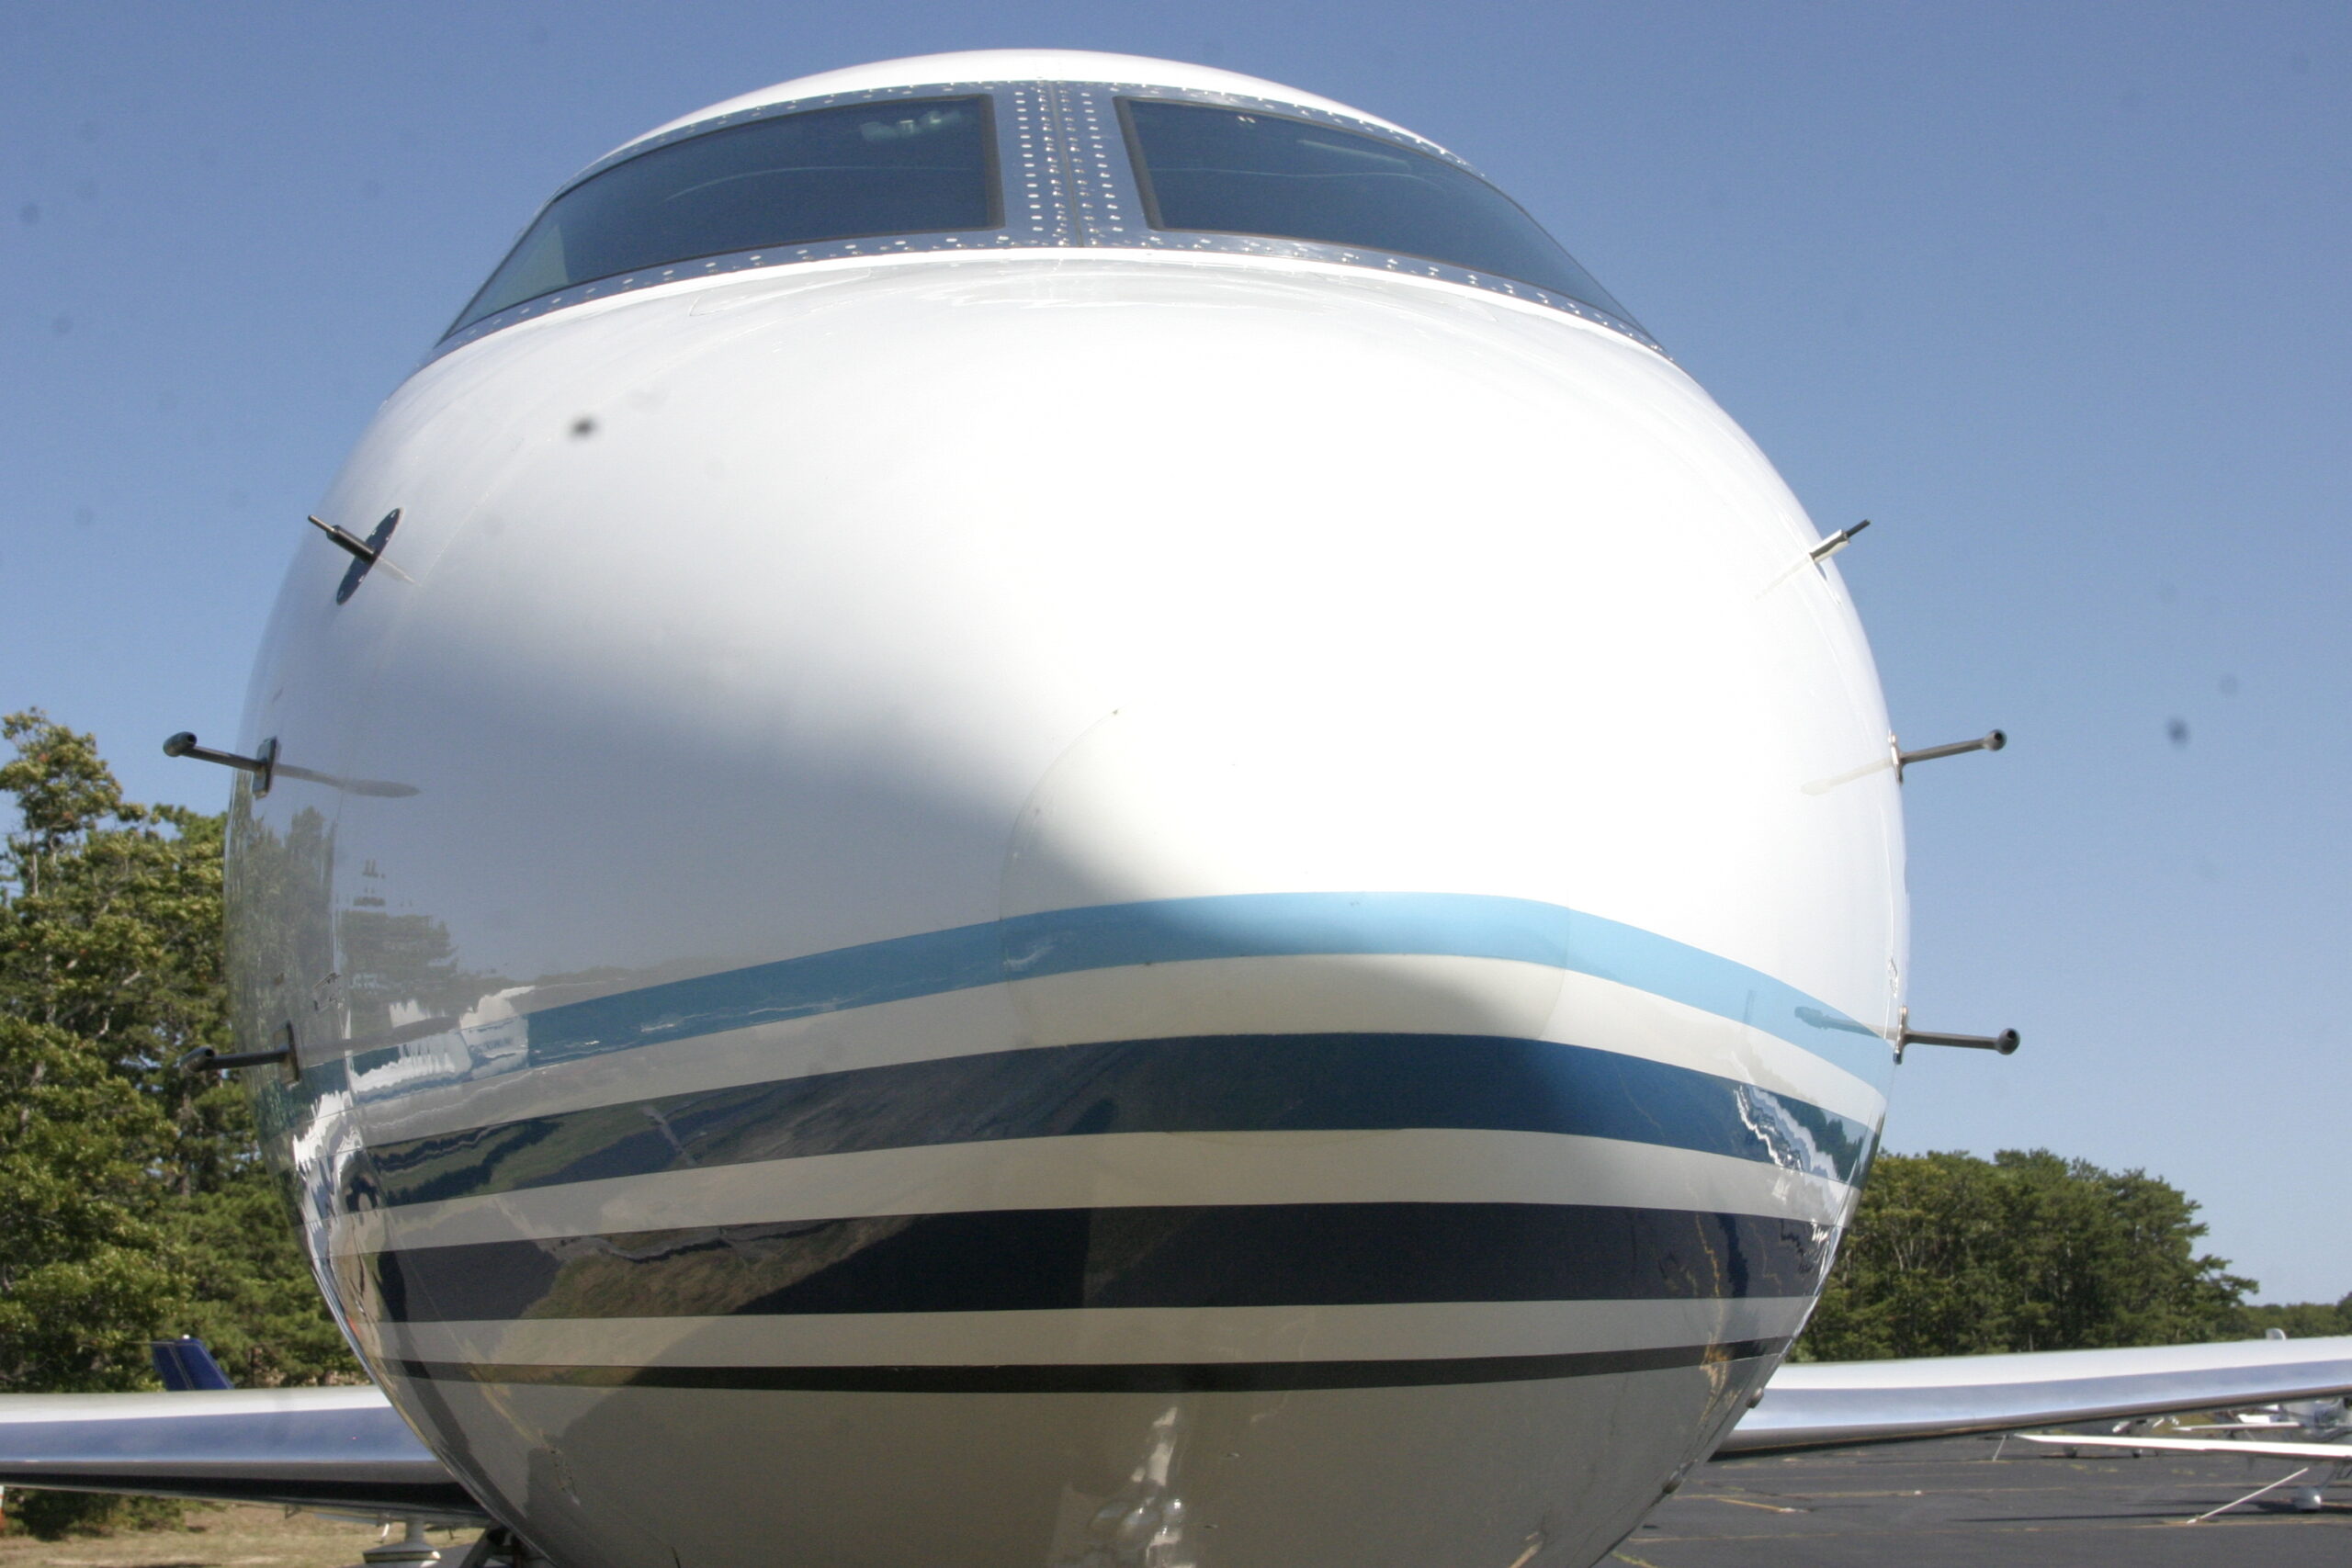 The largest private jets will be banned under new rules that will take effect at East Hampton Airport if the town's planned transition goes into effect next Tuesday night. The town must clear legal challenges between now and then.